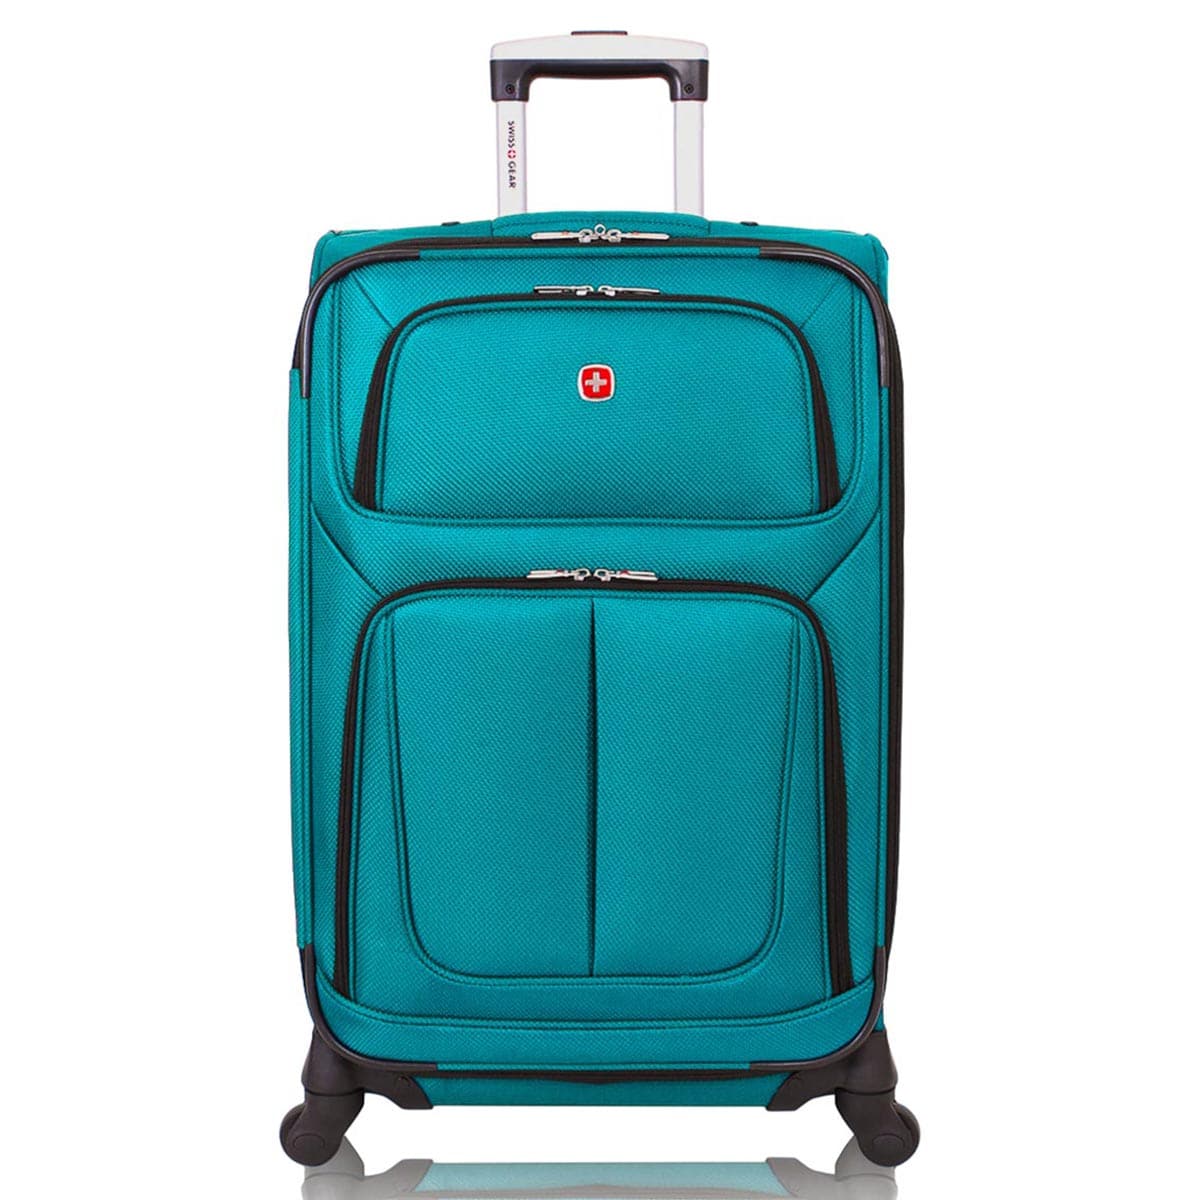 SwissGear 25" Expandable 4-Wheel Check-In Luggage